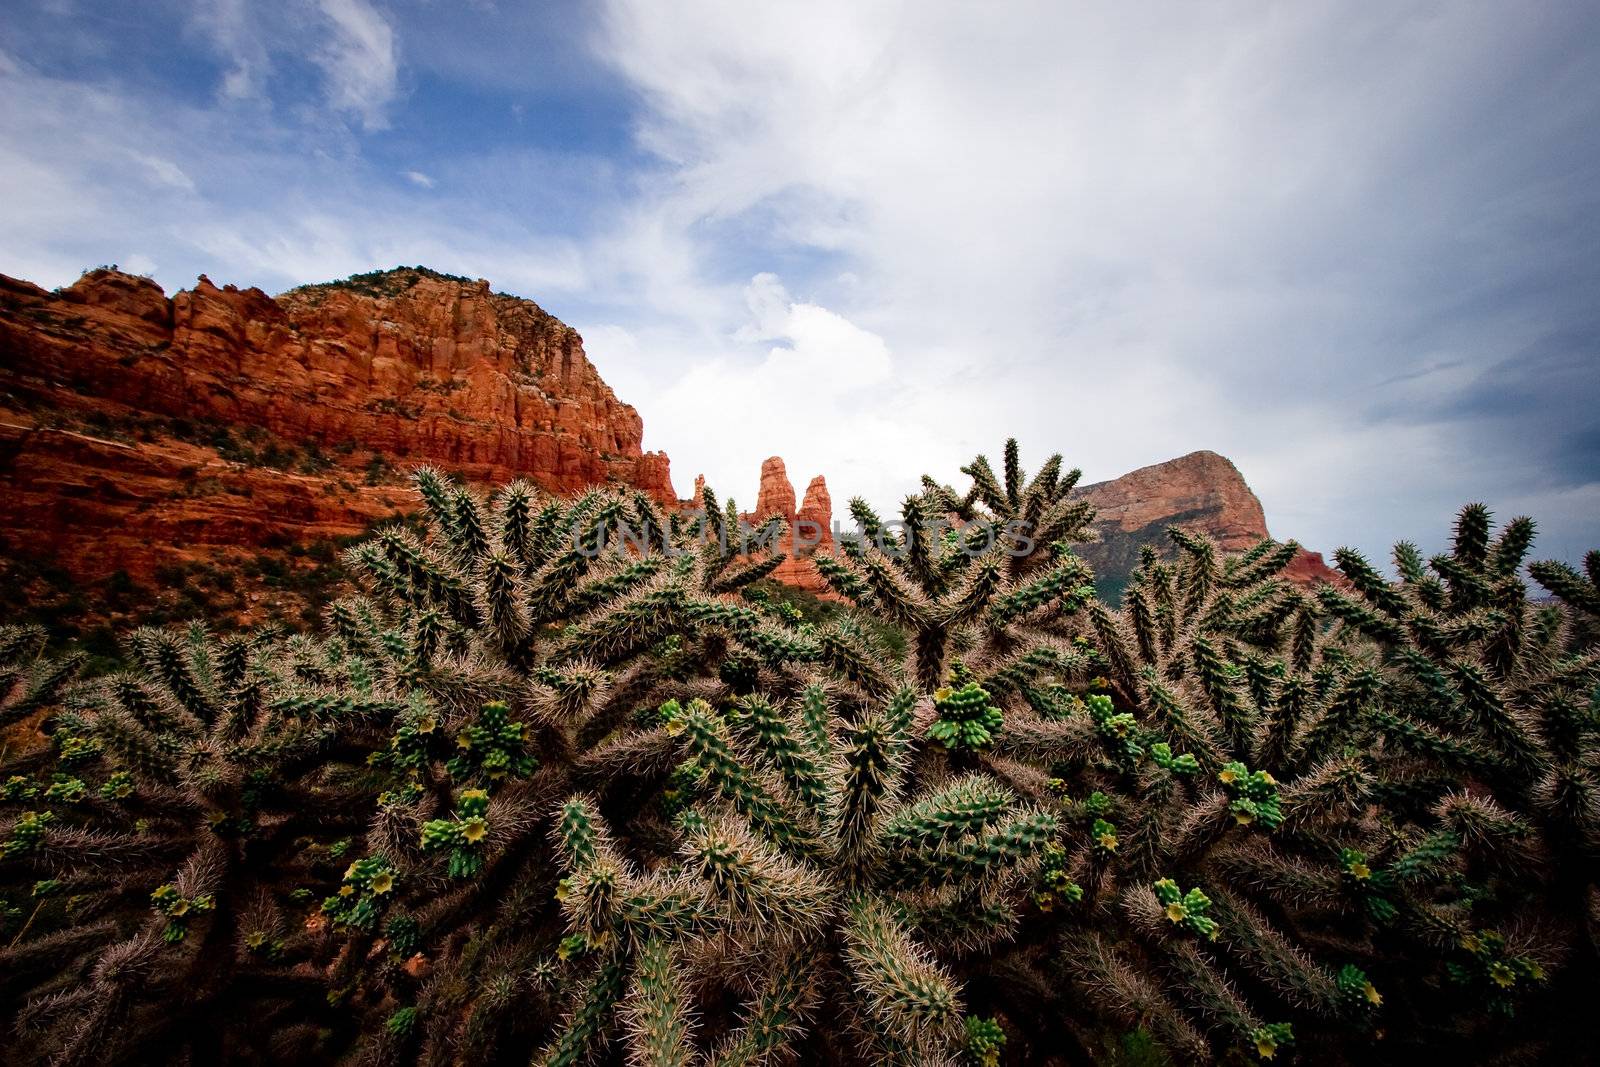 Cactus against red rocks by steheap